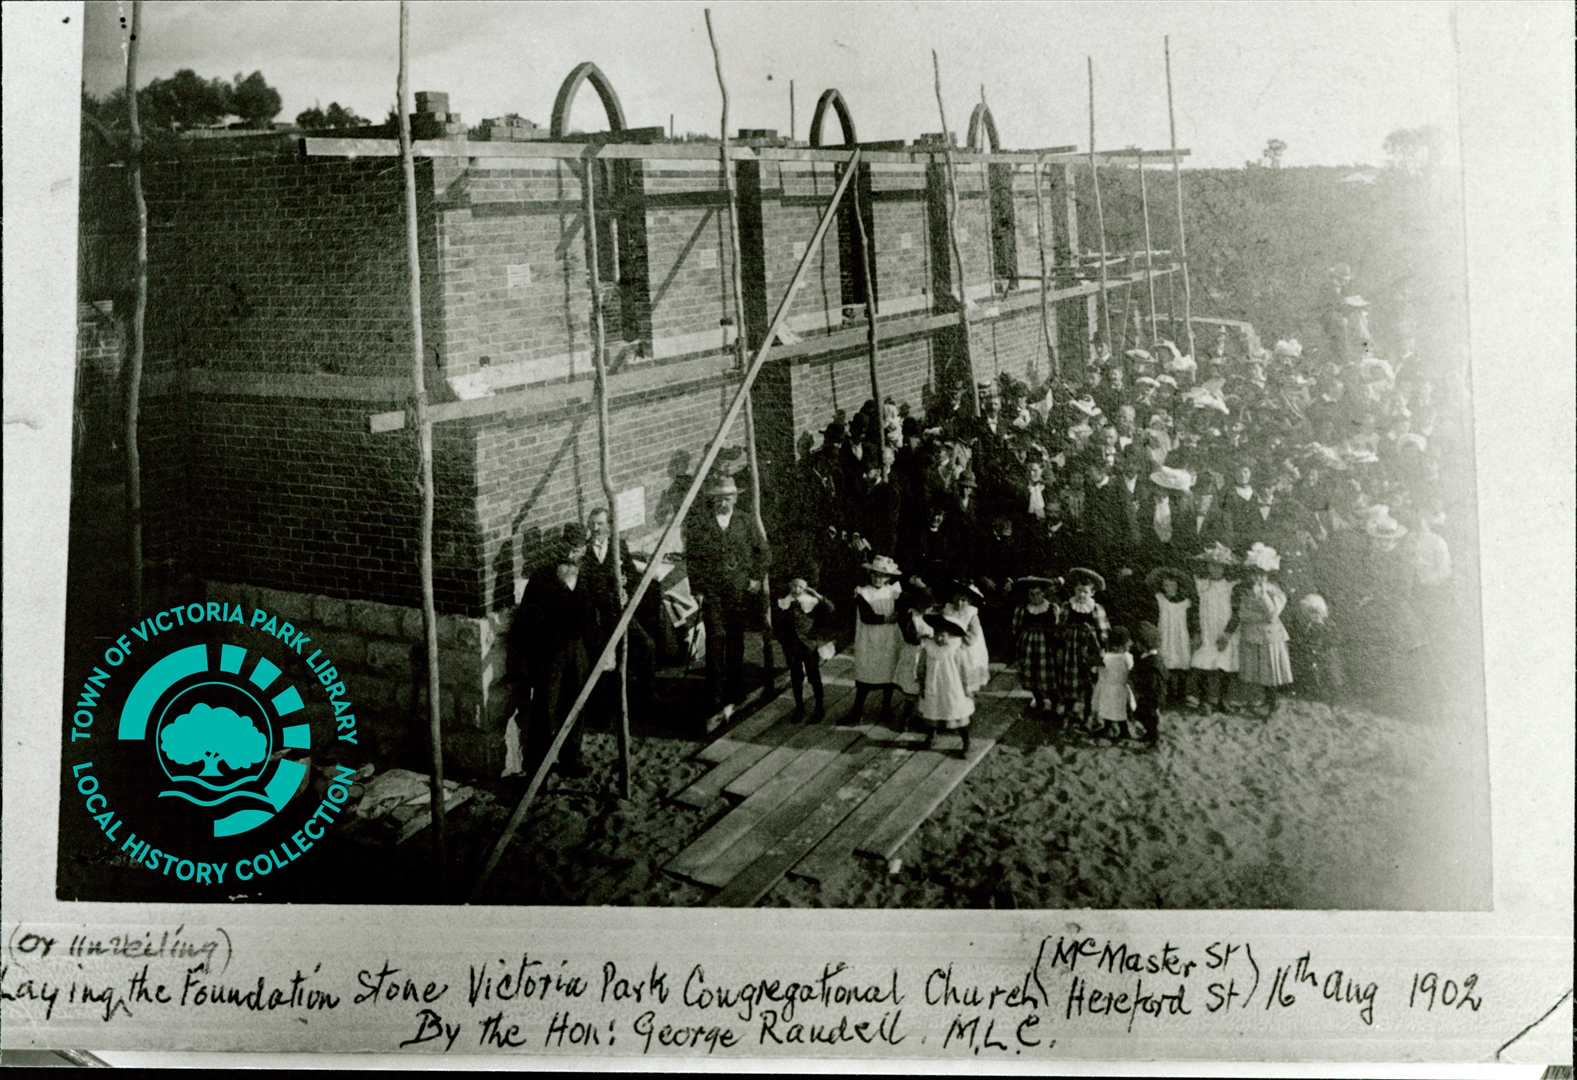 PH00026-01 Laying the foundation stone of the Victoria Park Congregational Church (PH90020) Image